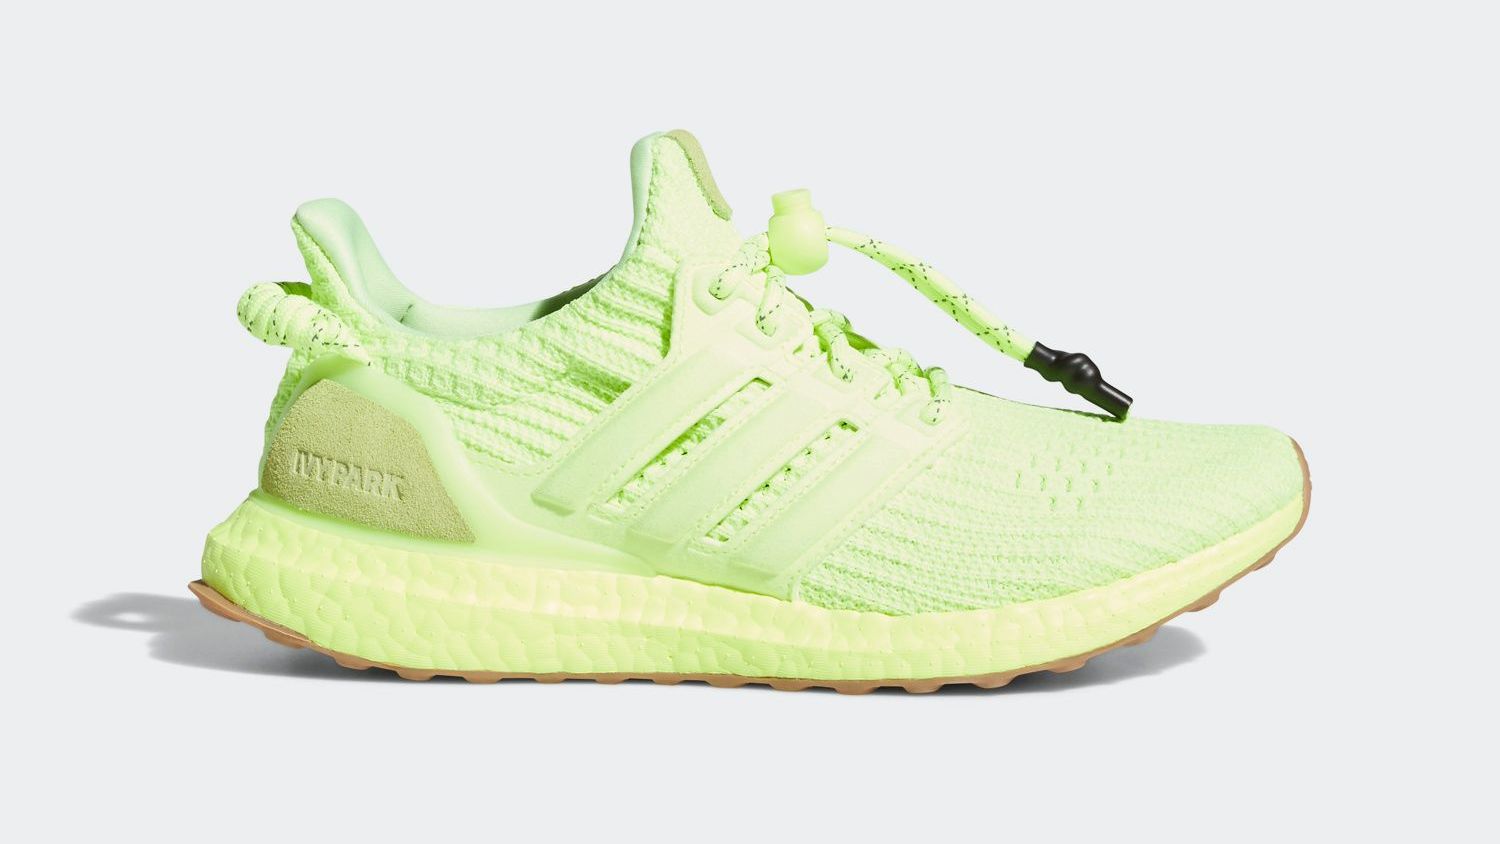 adidas ultra boost pink and green